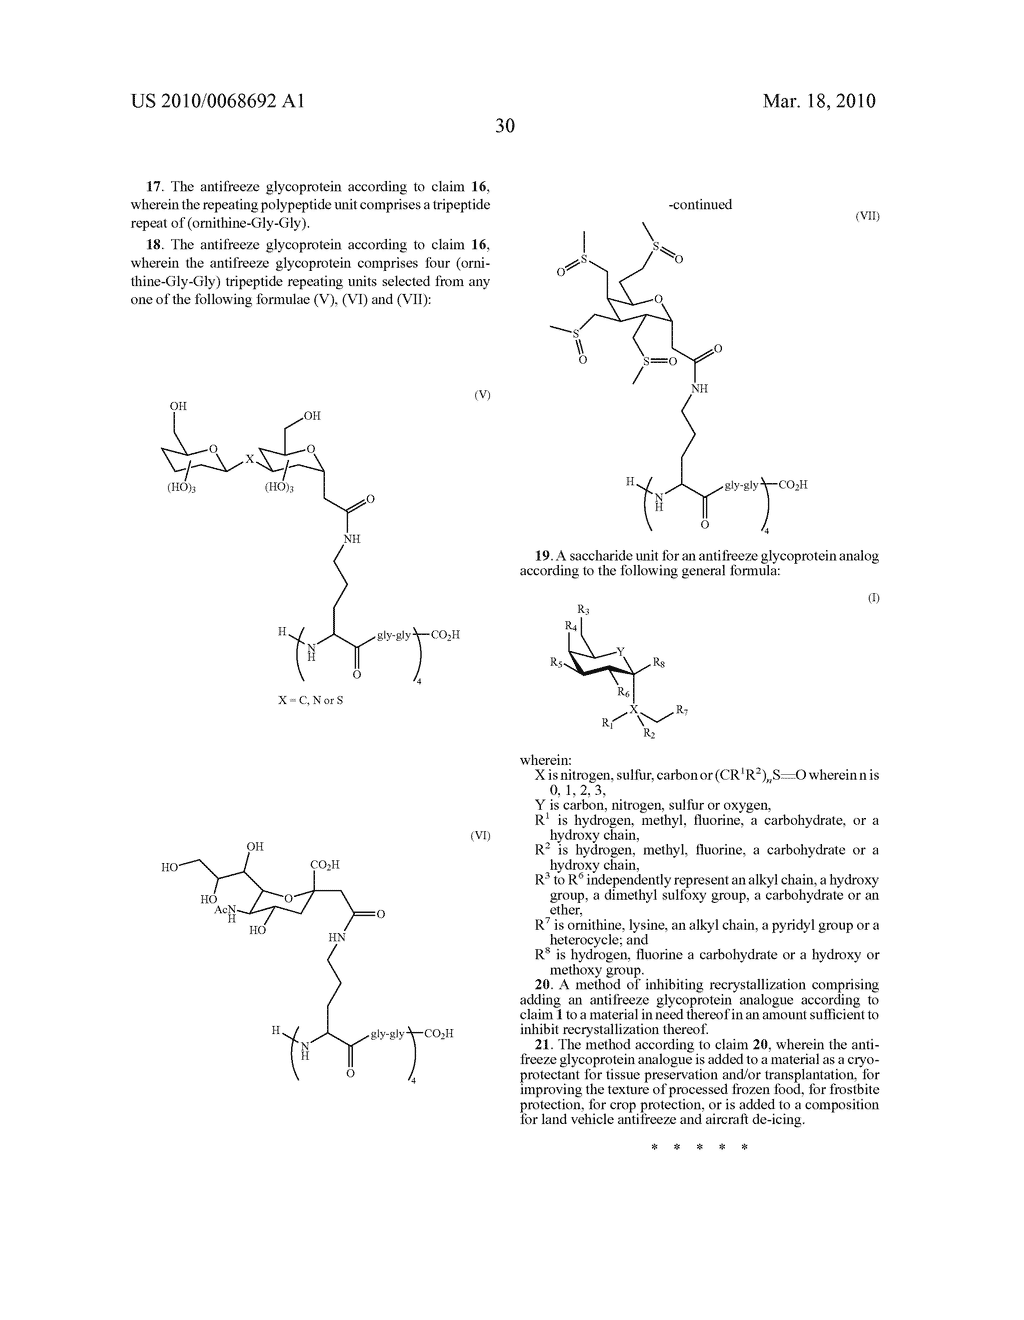 ANTIFREEZE GLYCOPROTEIN ANALOGUES AND USES THEREOF - diagram, schematic, and image 48